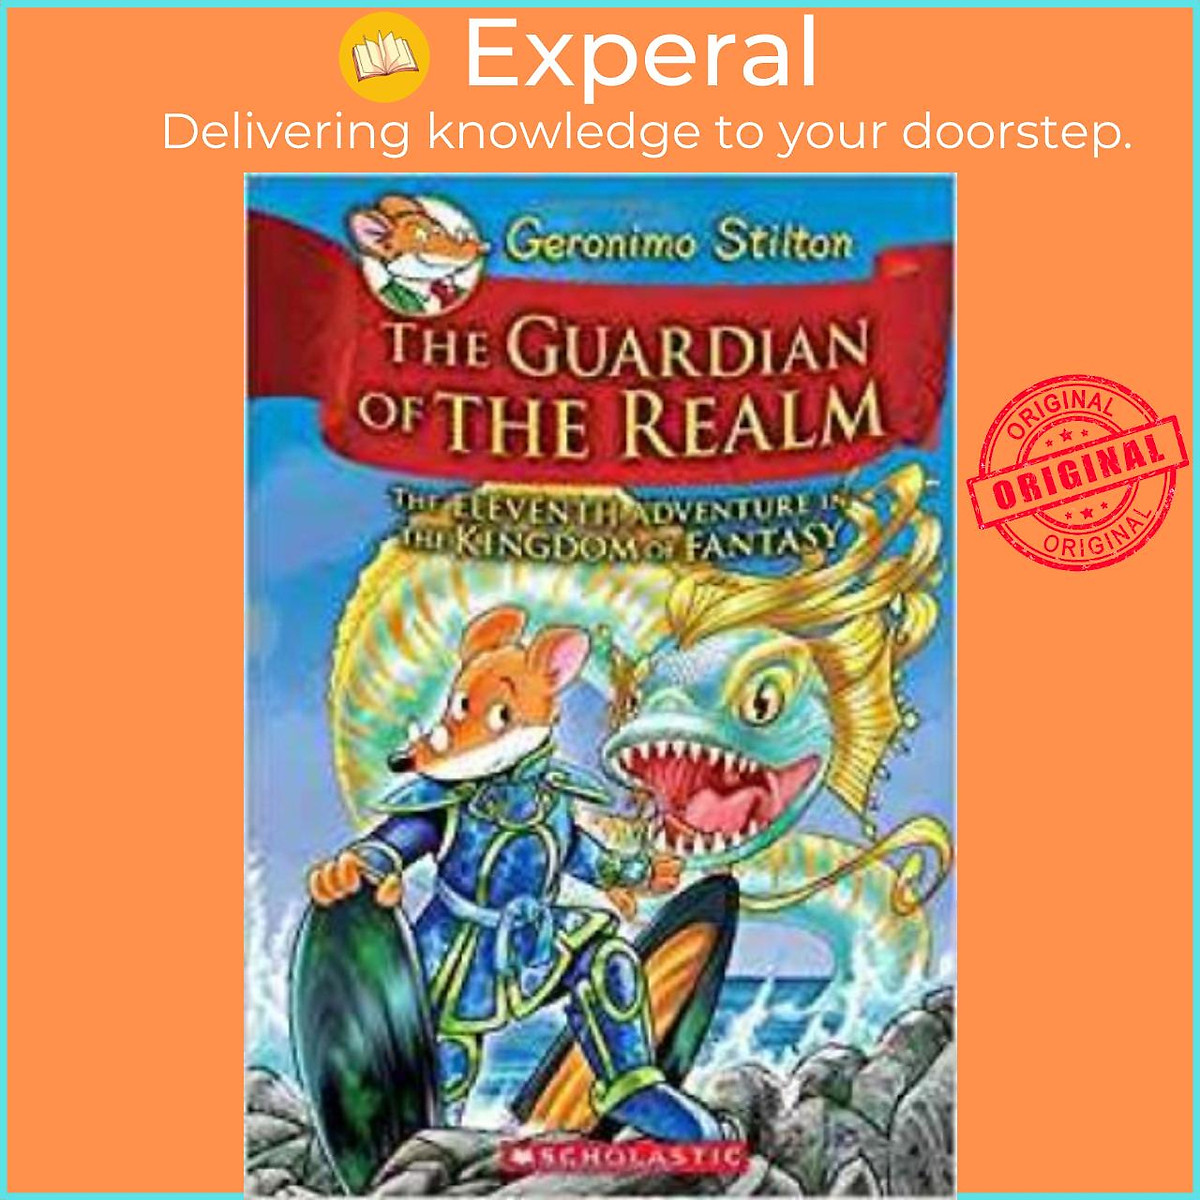 Sách - Geronimo Stilton and the Kingdom of Fantasy #11: The Guardian of the by Geronimo Stilton (US edition, hardcover)